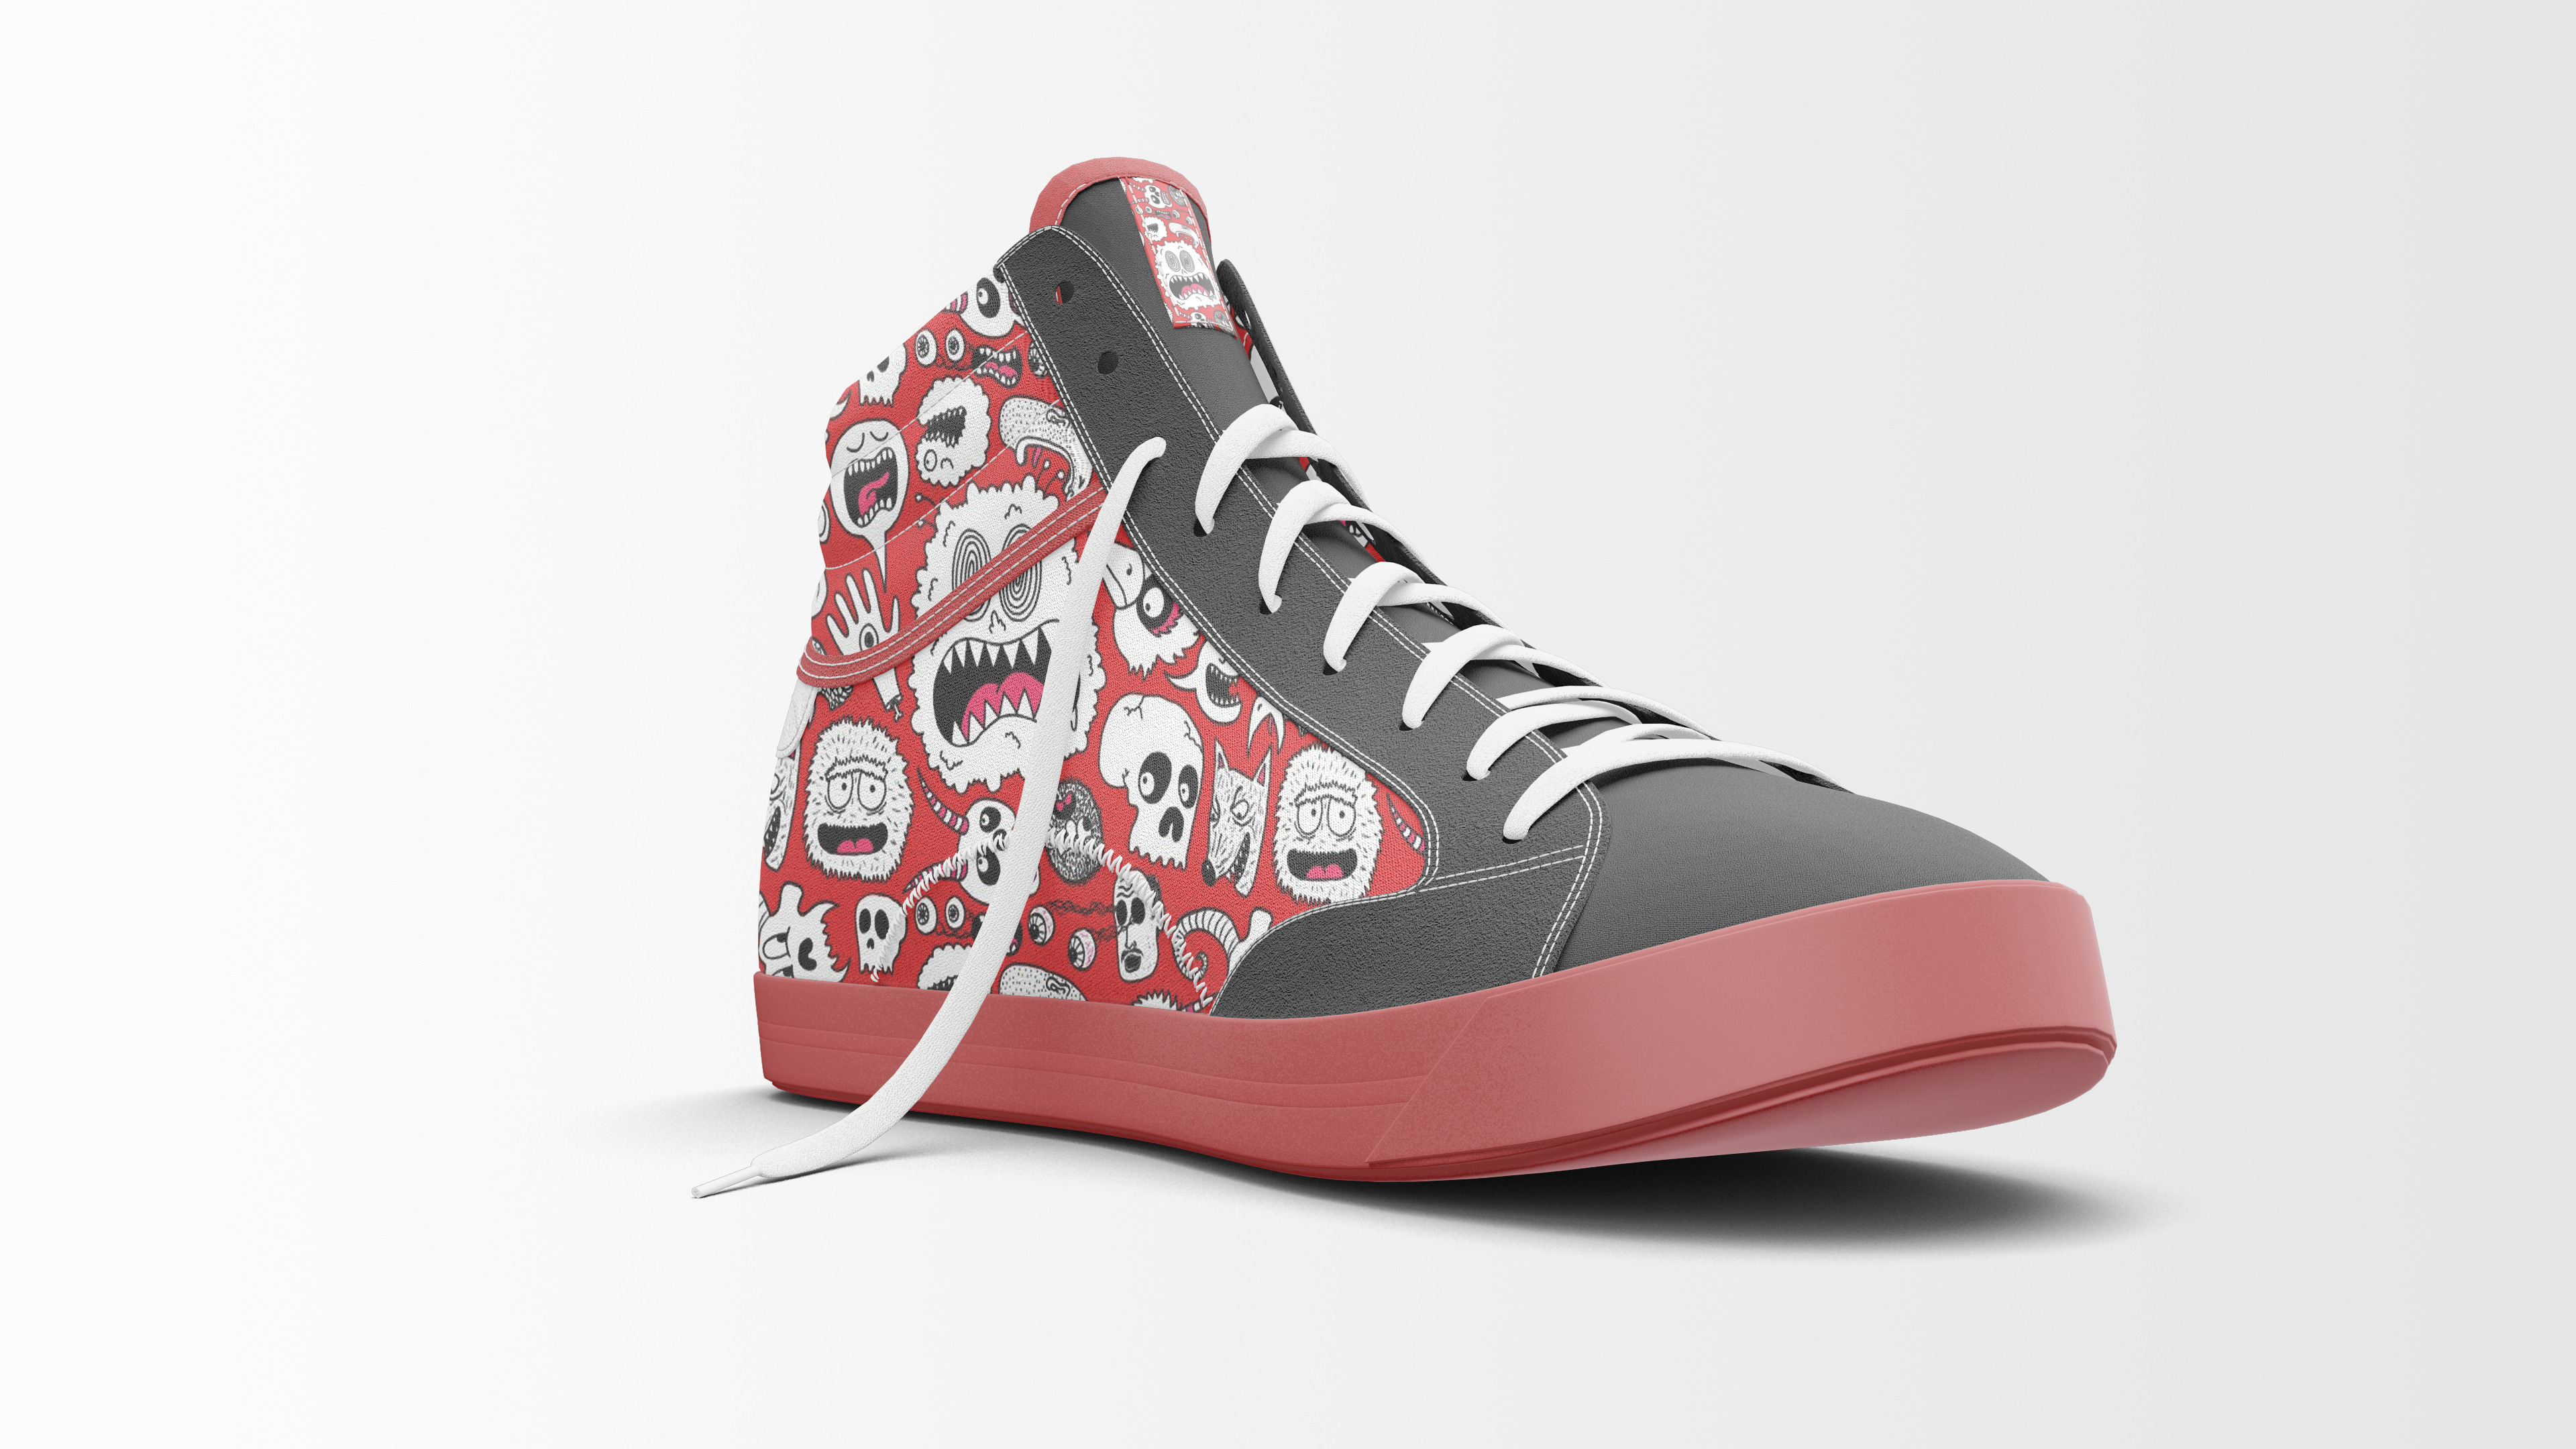 Download Shoes Mockup - Sneakers Shoes Mockup | Creative Product ...